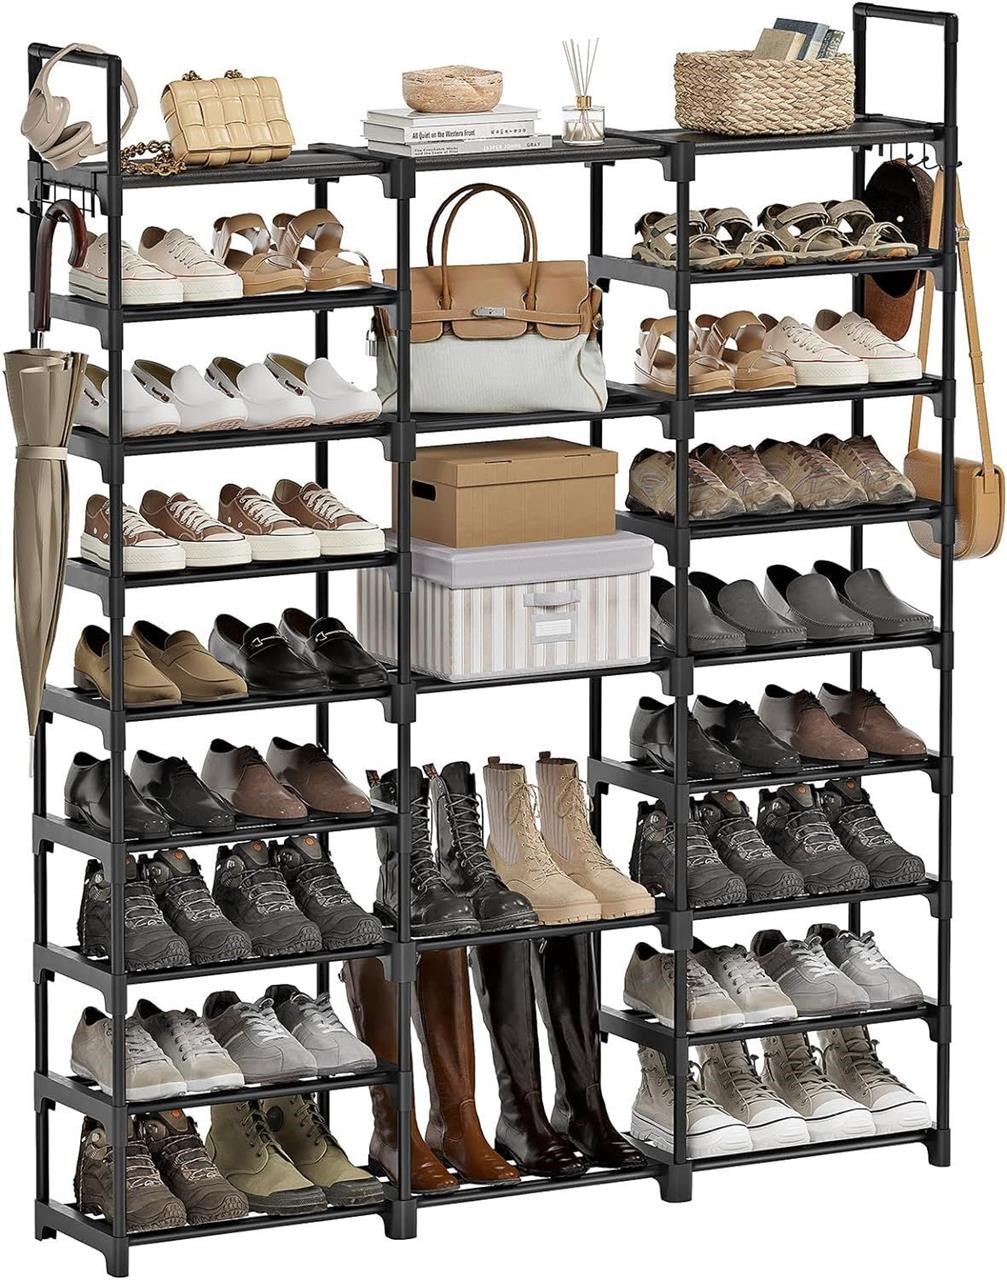 NEW 9 Tiers Large Shoe Rack 50-55 Pairs